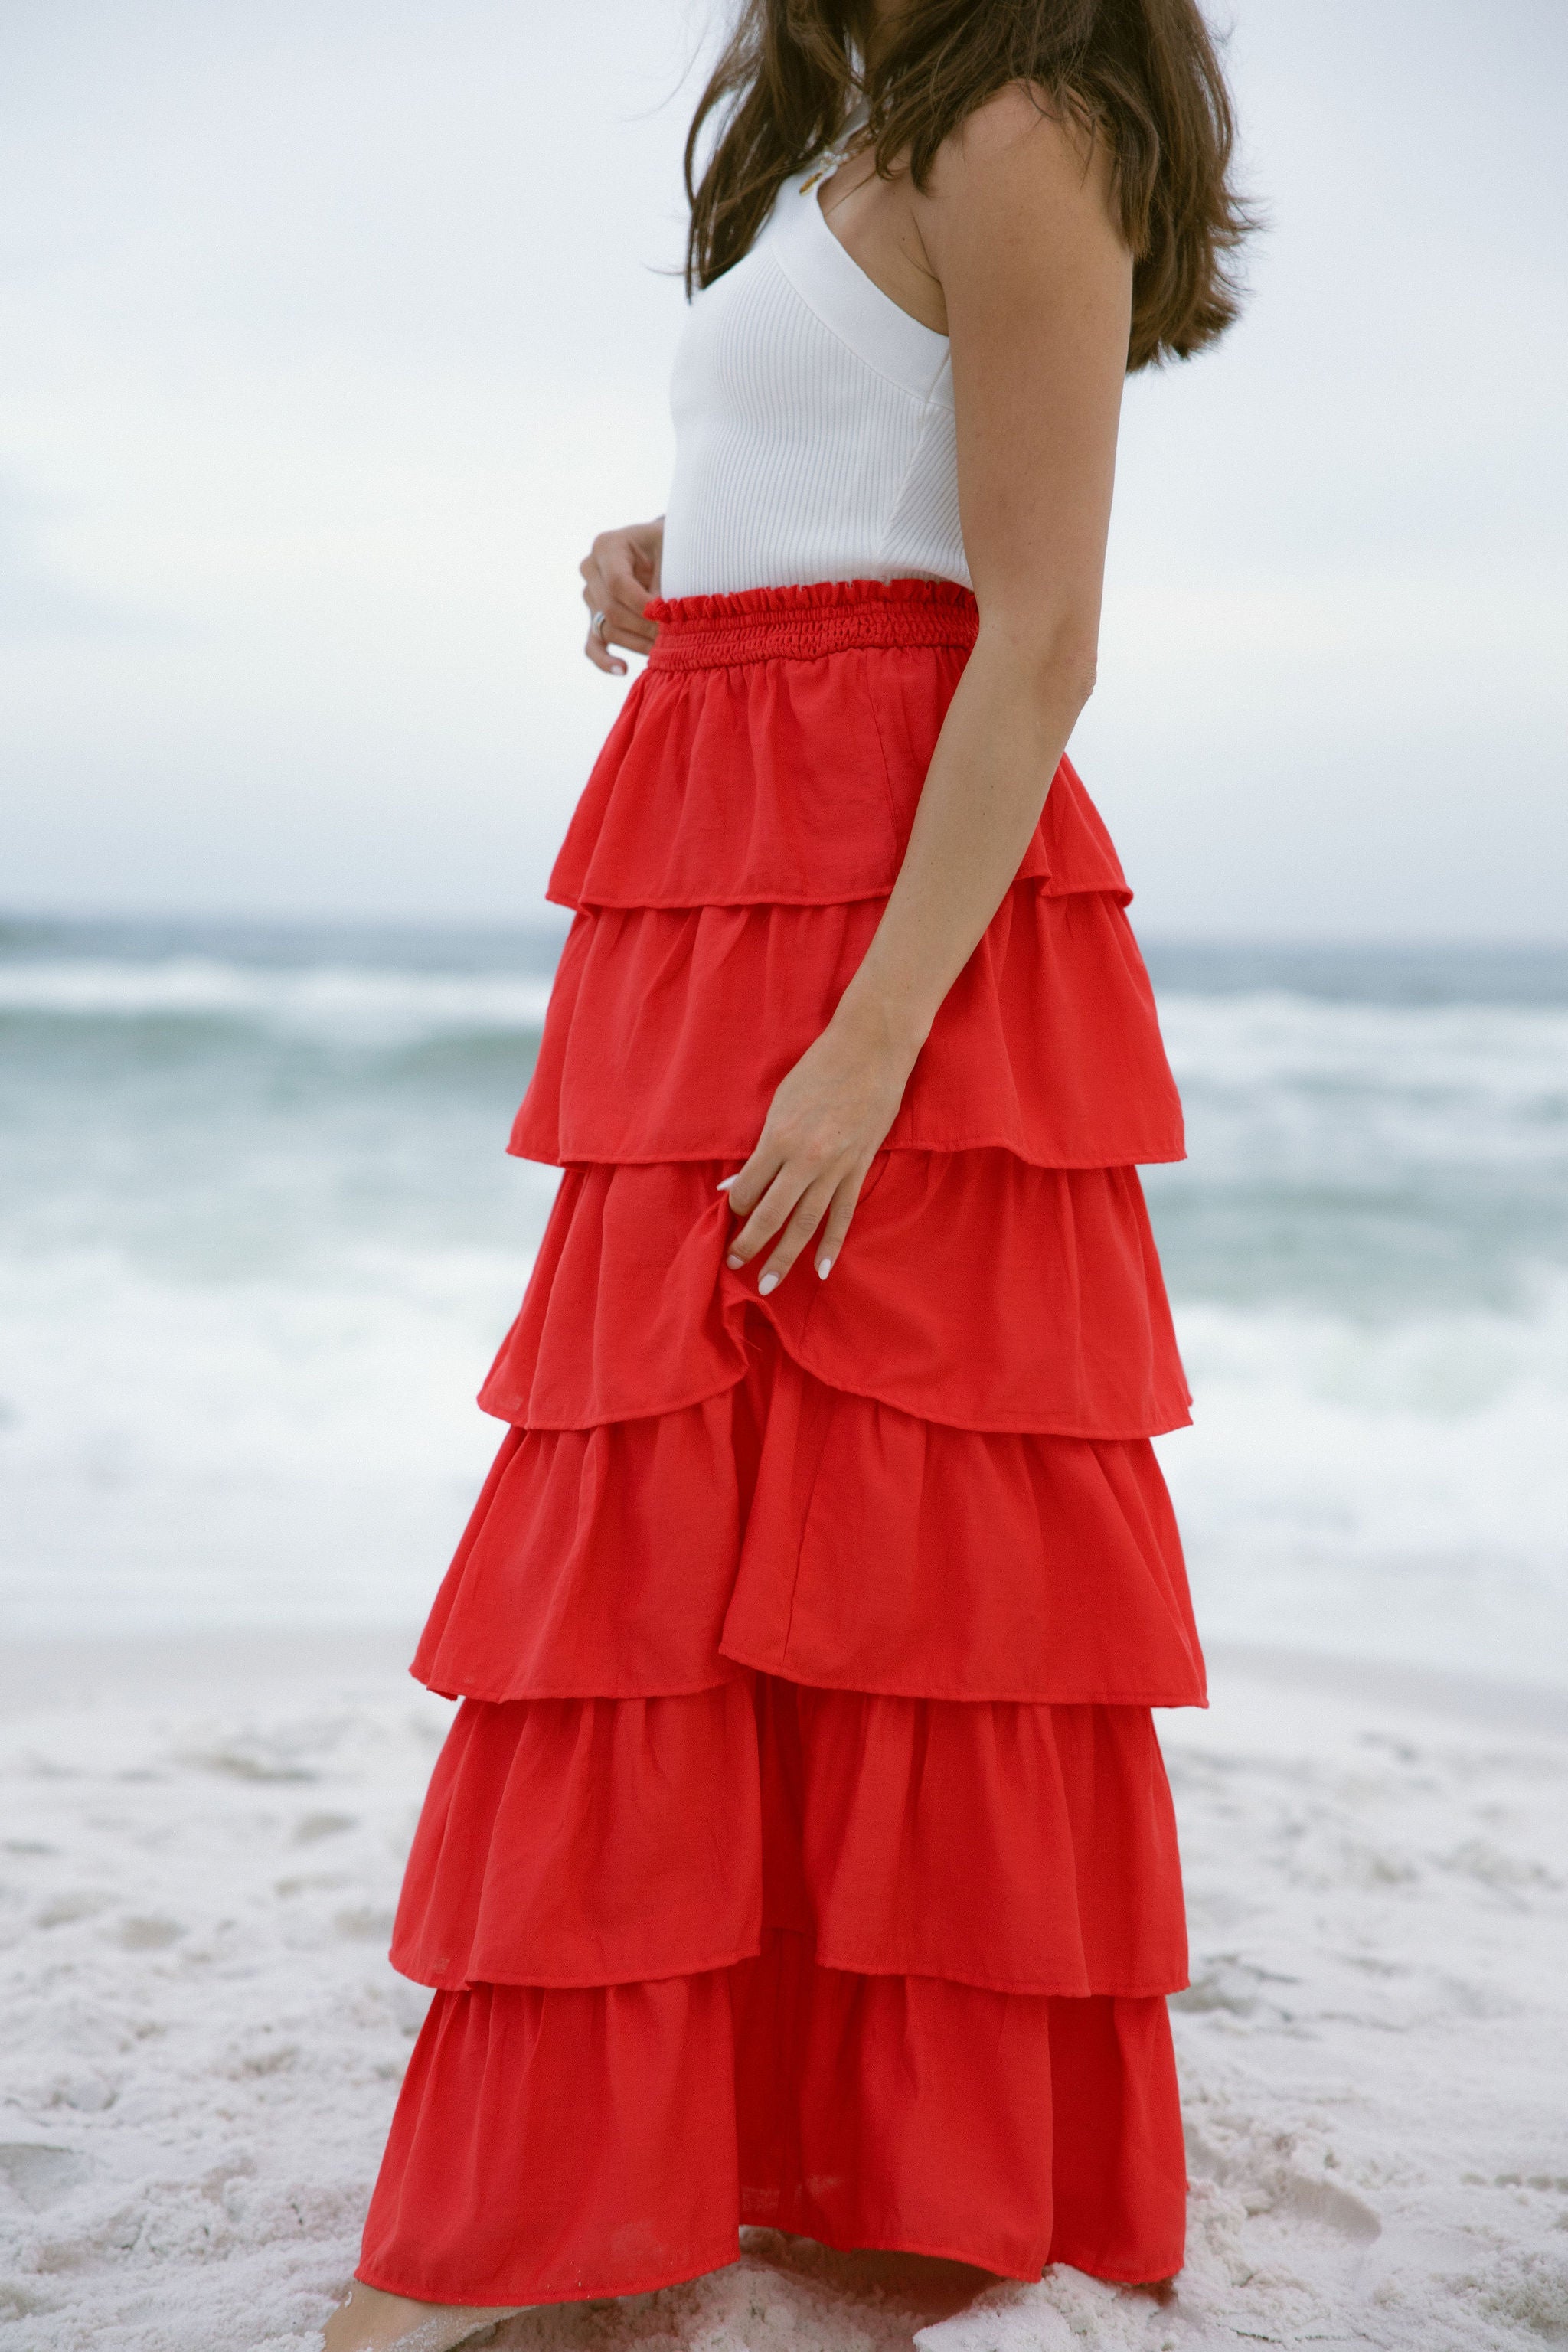 Lower body side view of female model wearing the Katrina Tiered Ruffle Maxi Skirt in Red that has tiered red fabric and an elastic waist. Worn with white top tucked in.